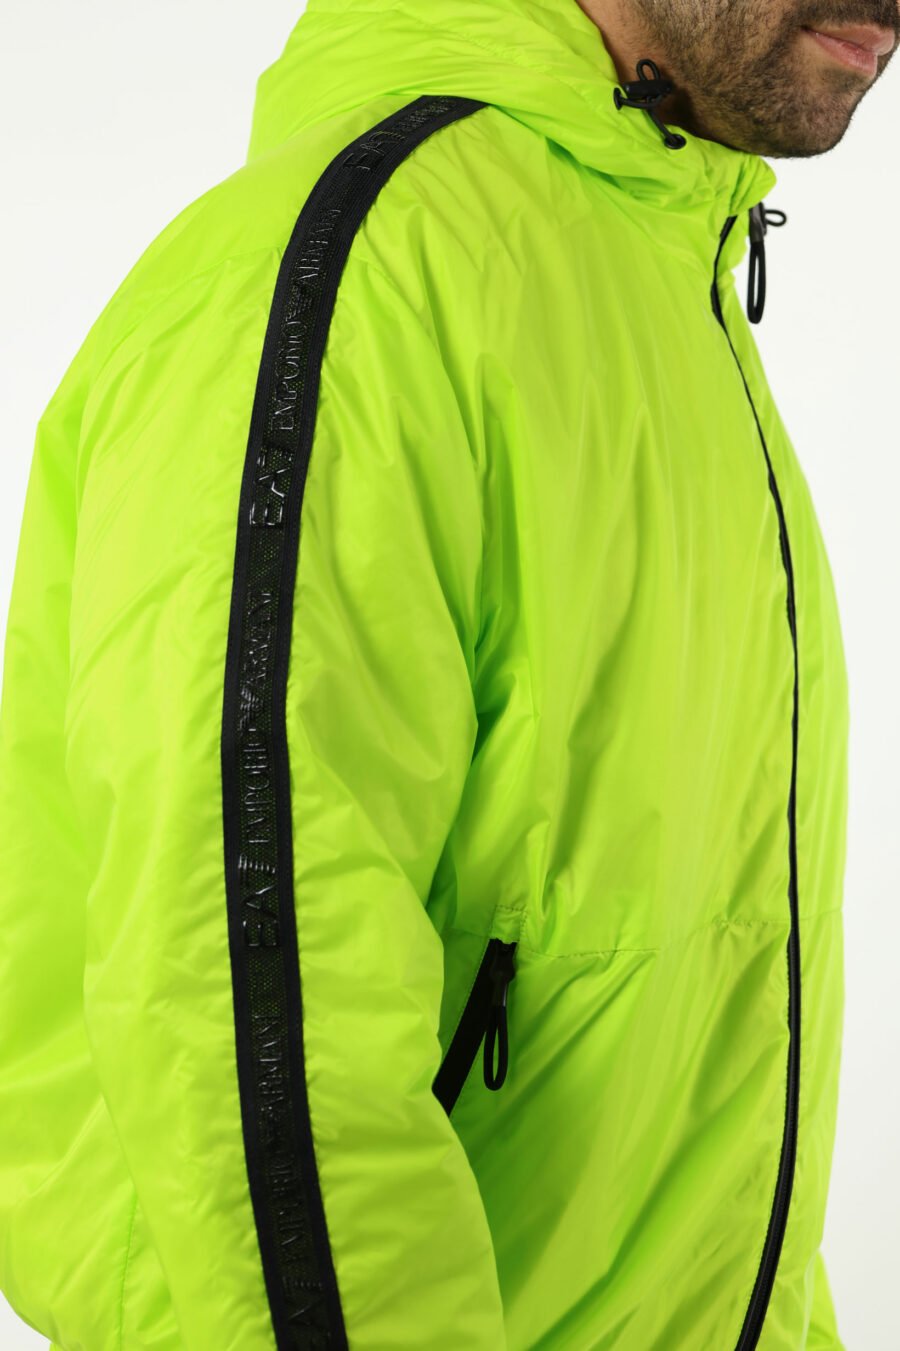 Lime green waterproof jacket with hood, white side lines and "lux identity" logo - 110969